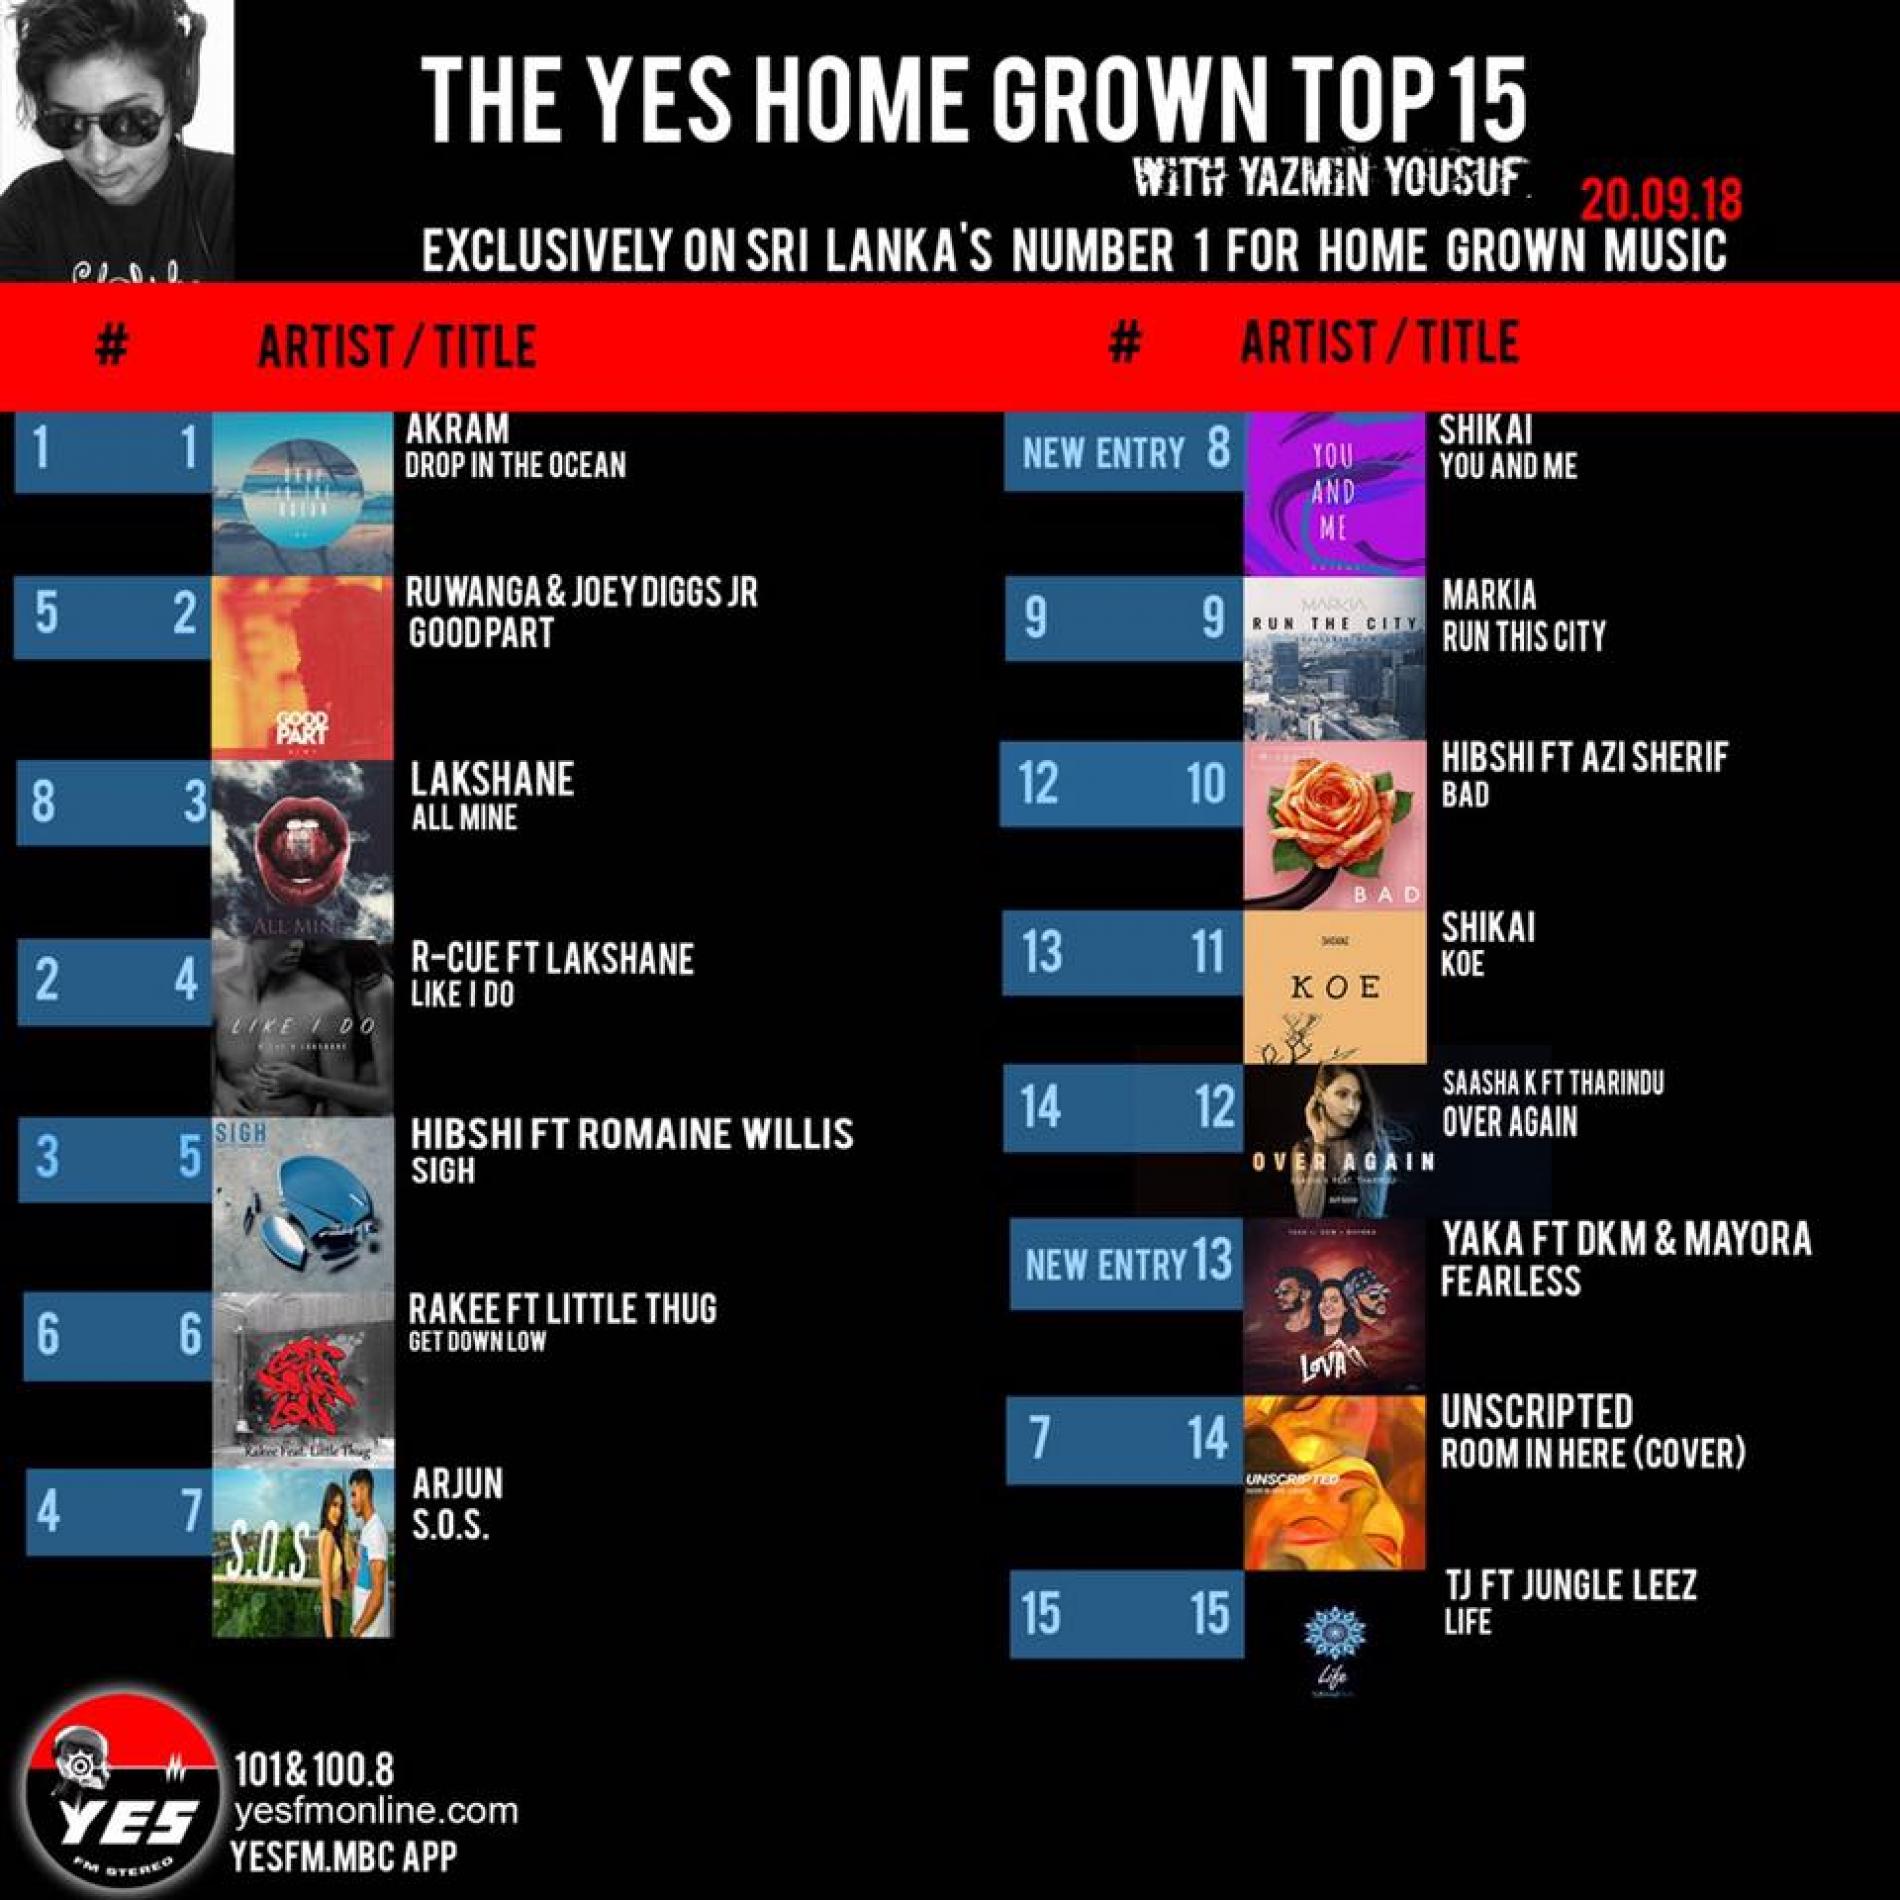 Akram Spends Week 2 On Top The YES Home Grown Top 15